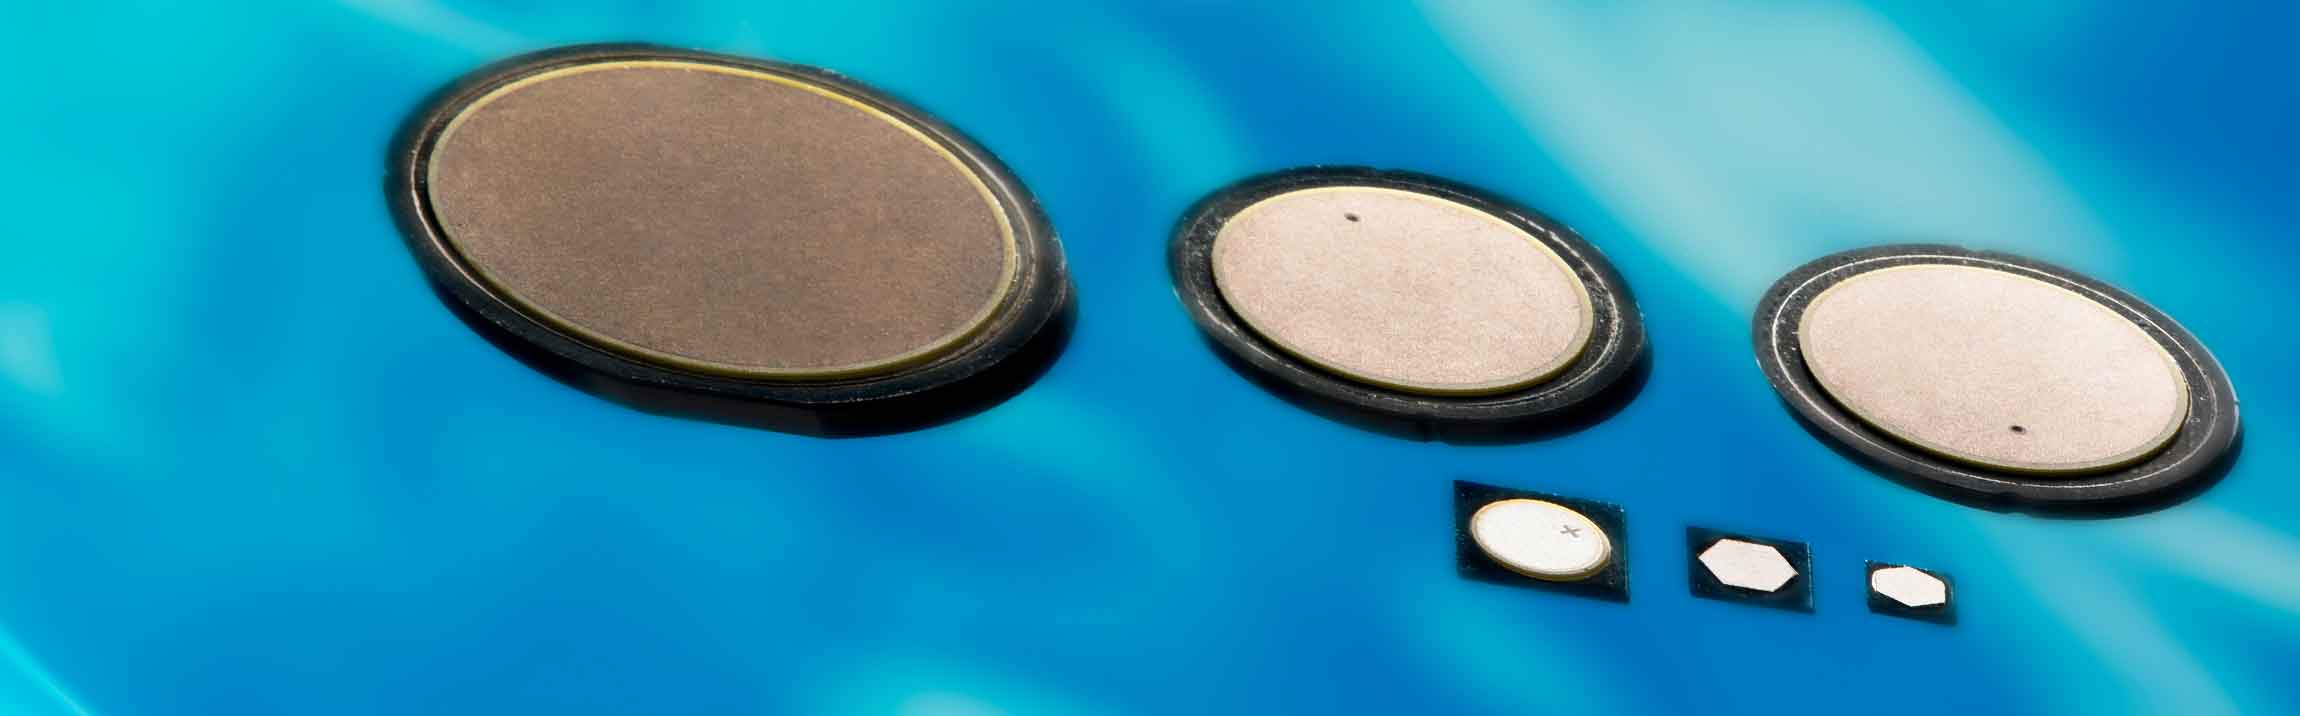 Piezoelectric micropump family from Fraunhofer EMFT